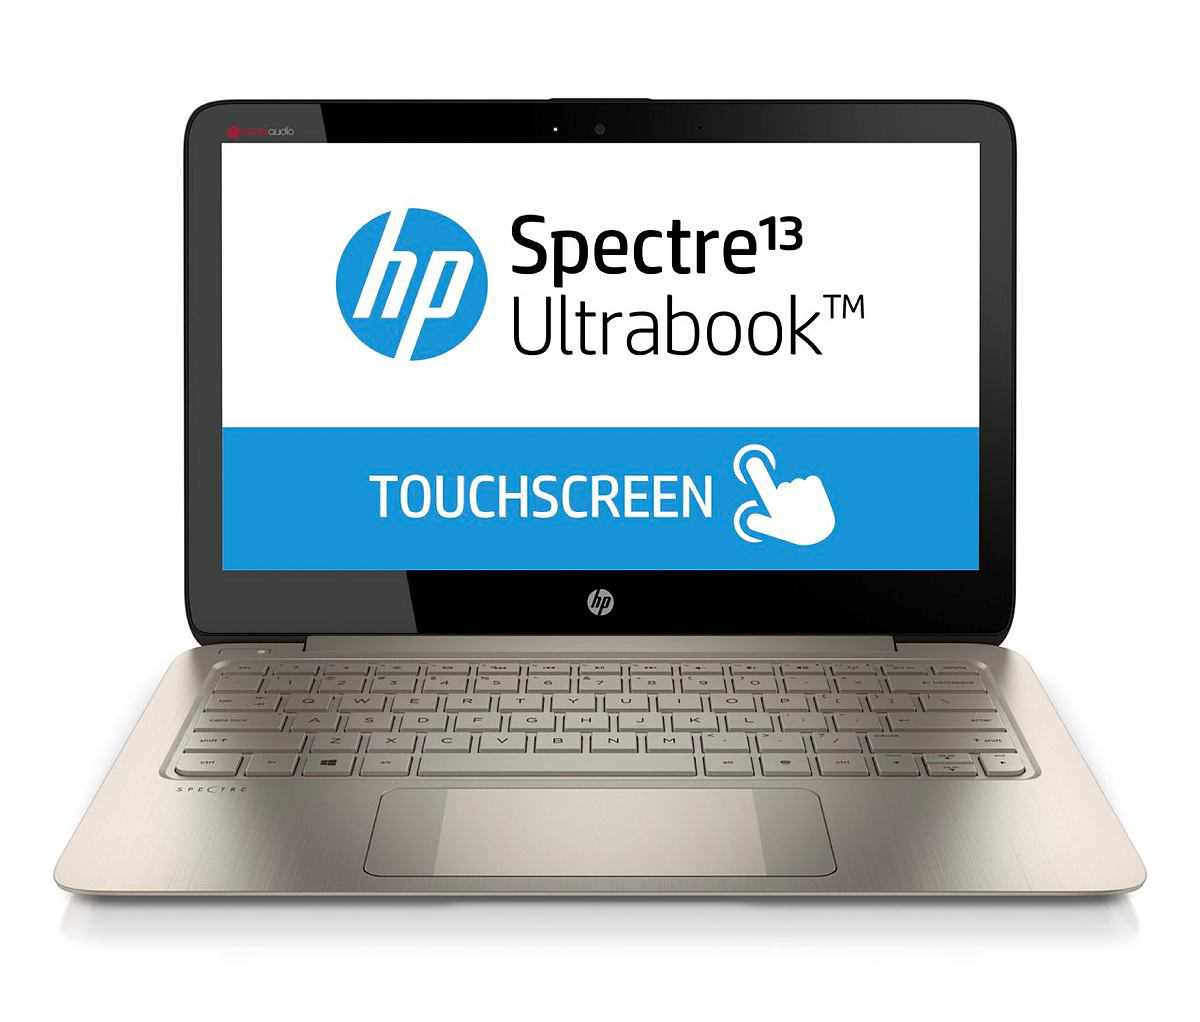 HP Spectre 13 review: an exceedingly well-executed return to the basics